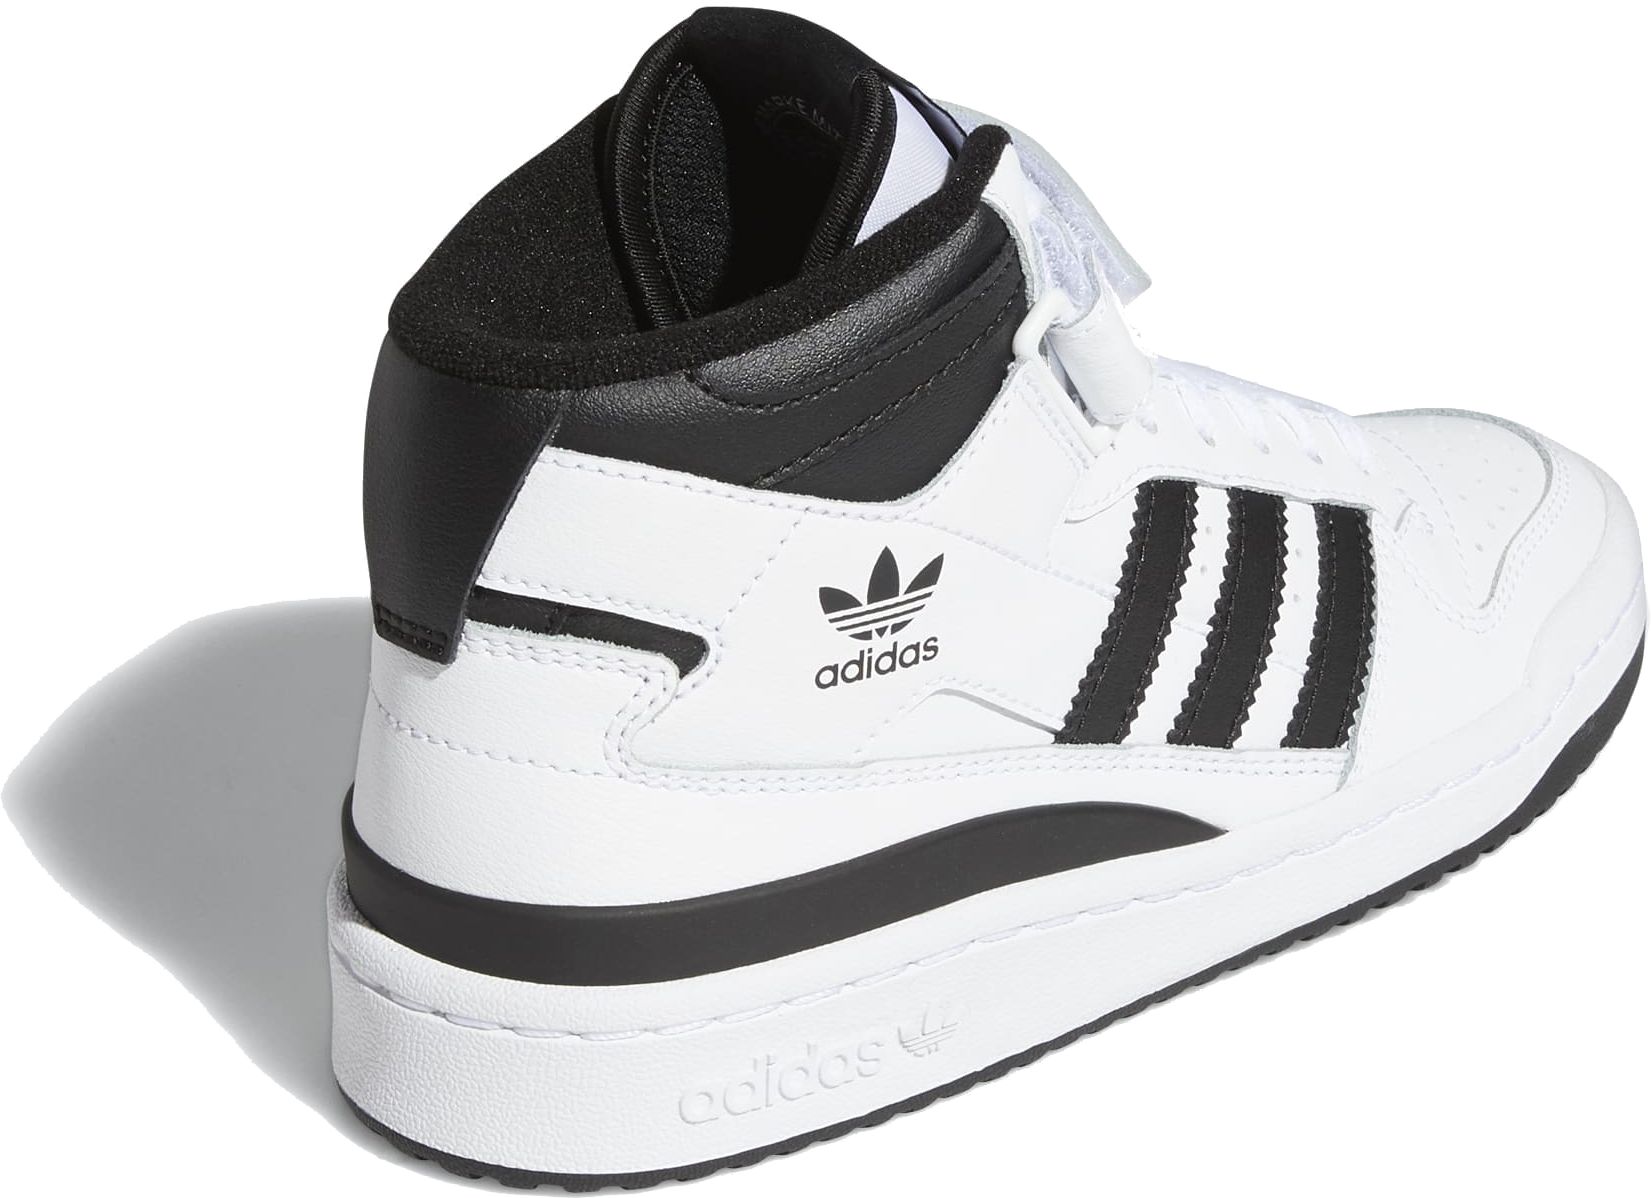 ADIDAS, Forum Mid Shoes